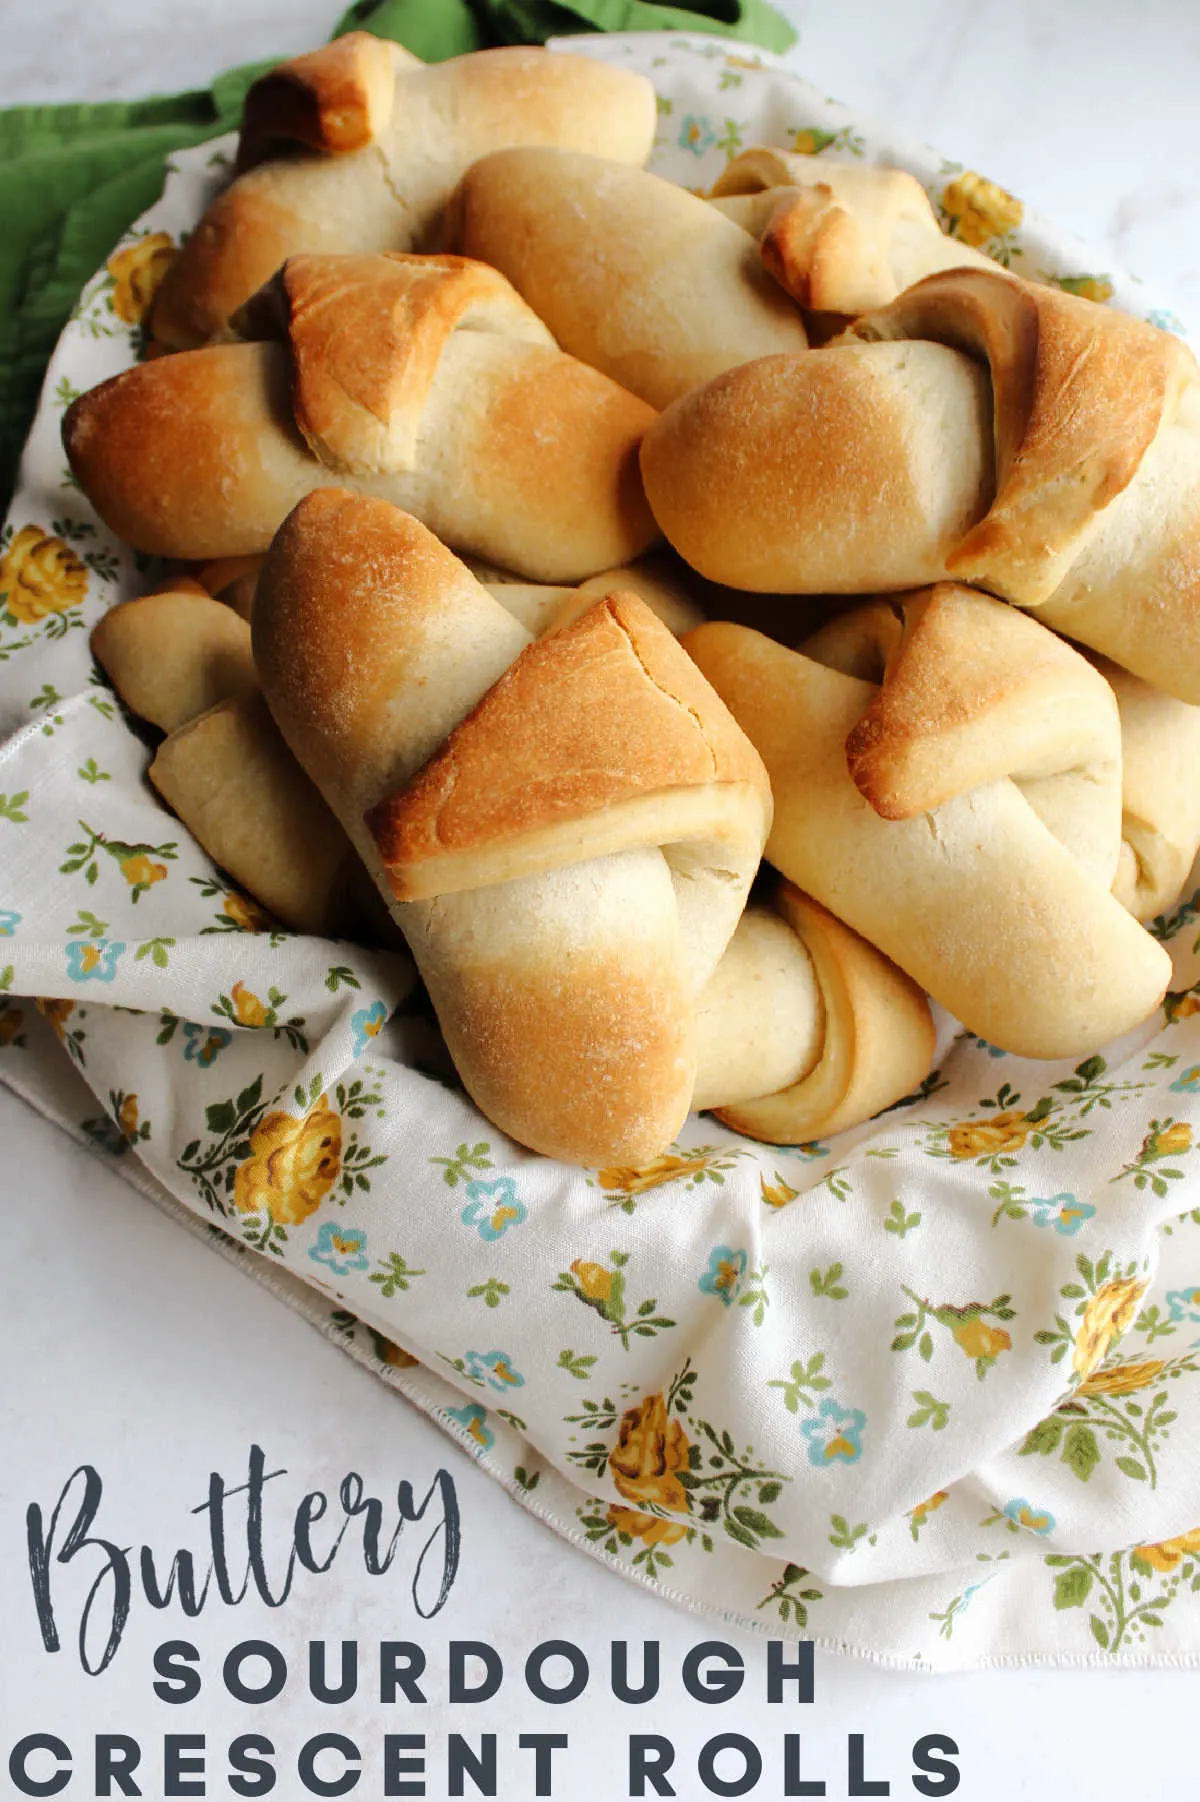 Sourdough crescent rolls are soft, ever so slightly sweet with a nicely rounded sourdough flavor. They are the perfect accompaniment to your next dinner!